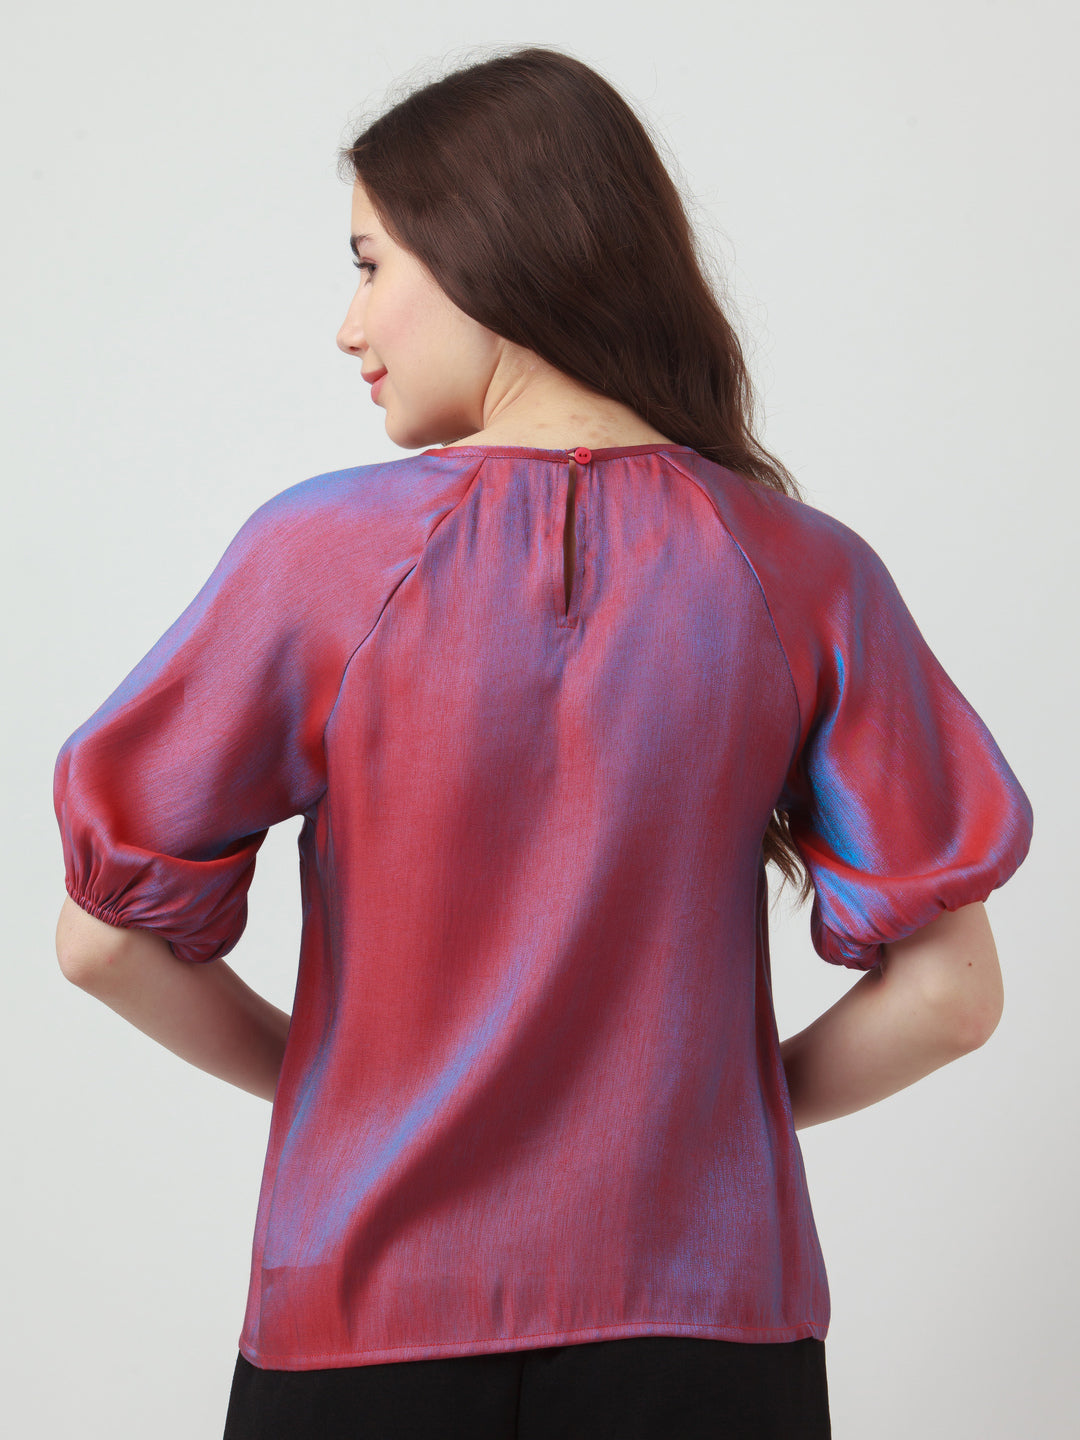 Red Solid Puff Sleeve Top For Women